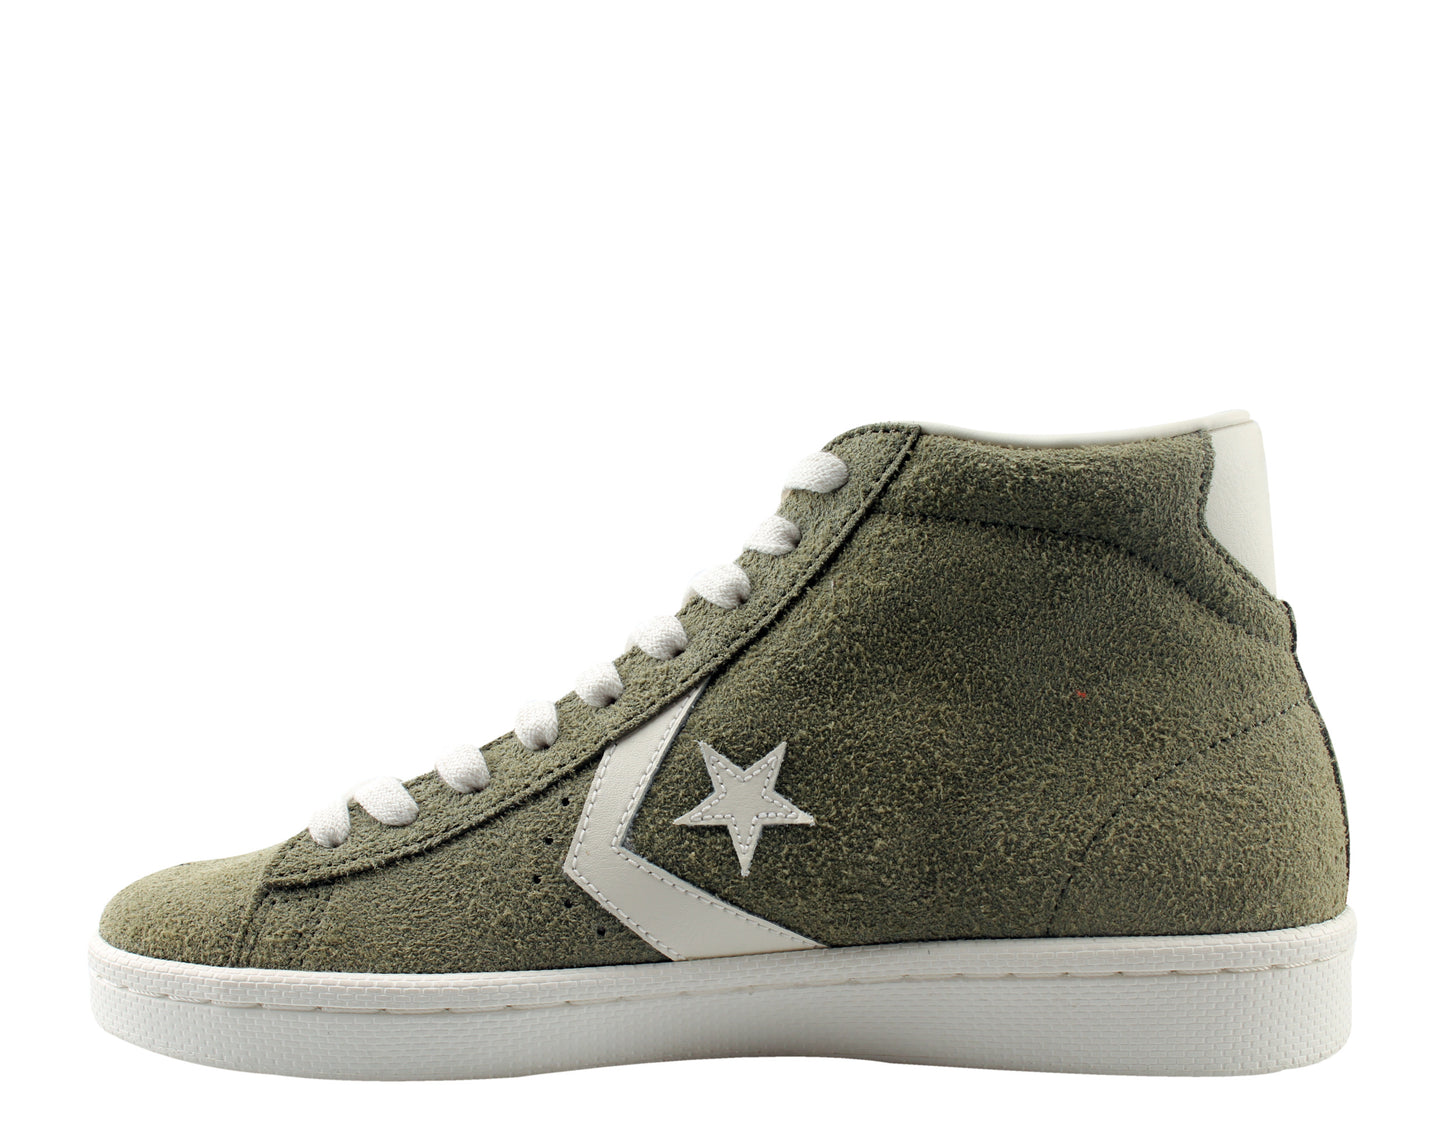 Converse CT AS Pro Leather Mid Medium Olive/Egret Men's Sneakers 157690C